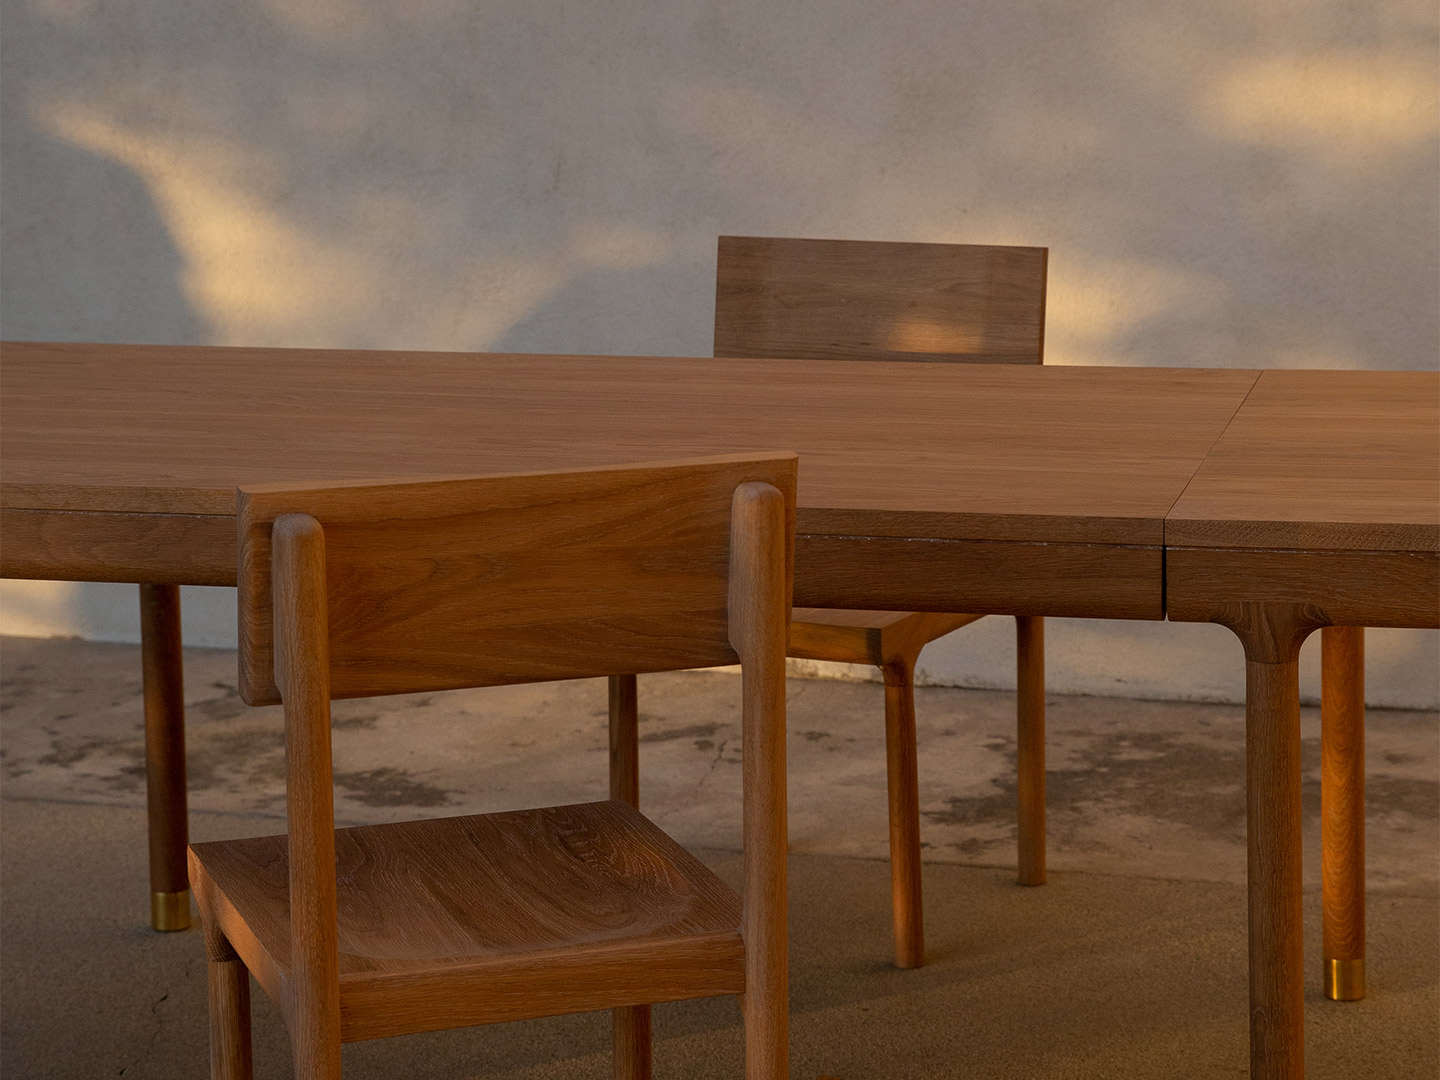 The new Kalon Studios highland collection of timber furniture